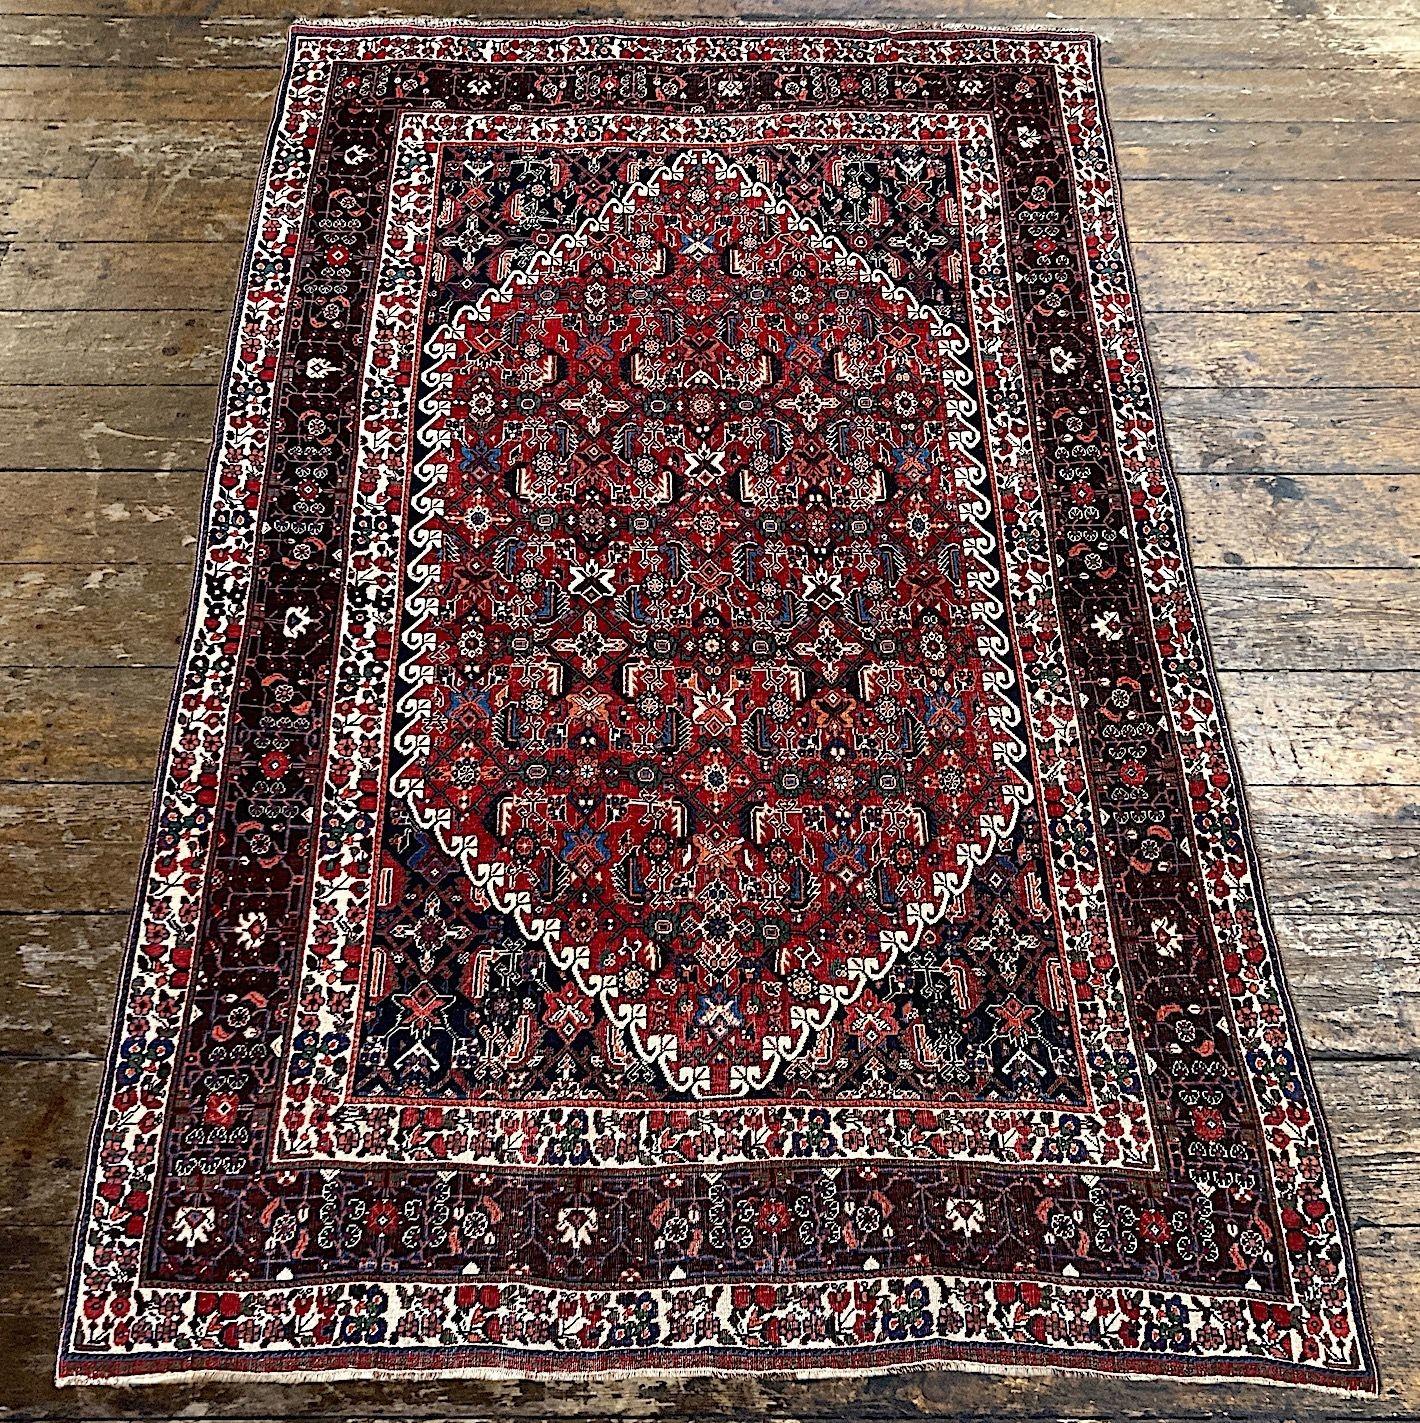 Early 20th Century Antique Qashqai Rug 2.61m x 1.65m For Sale